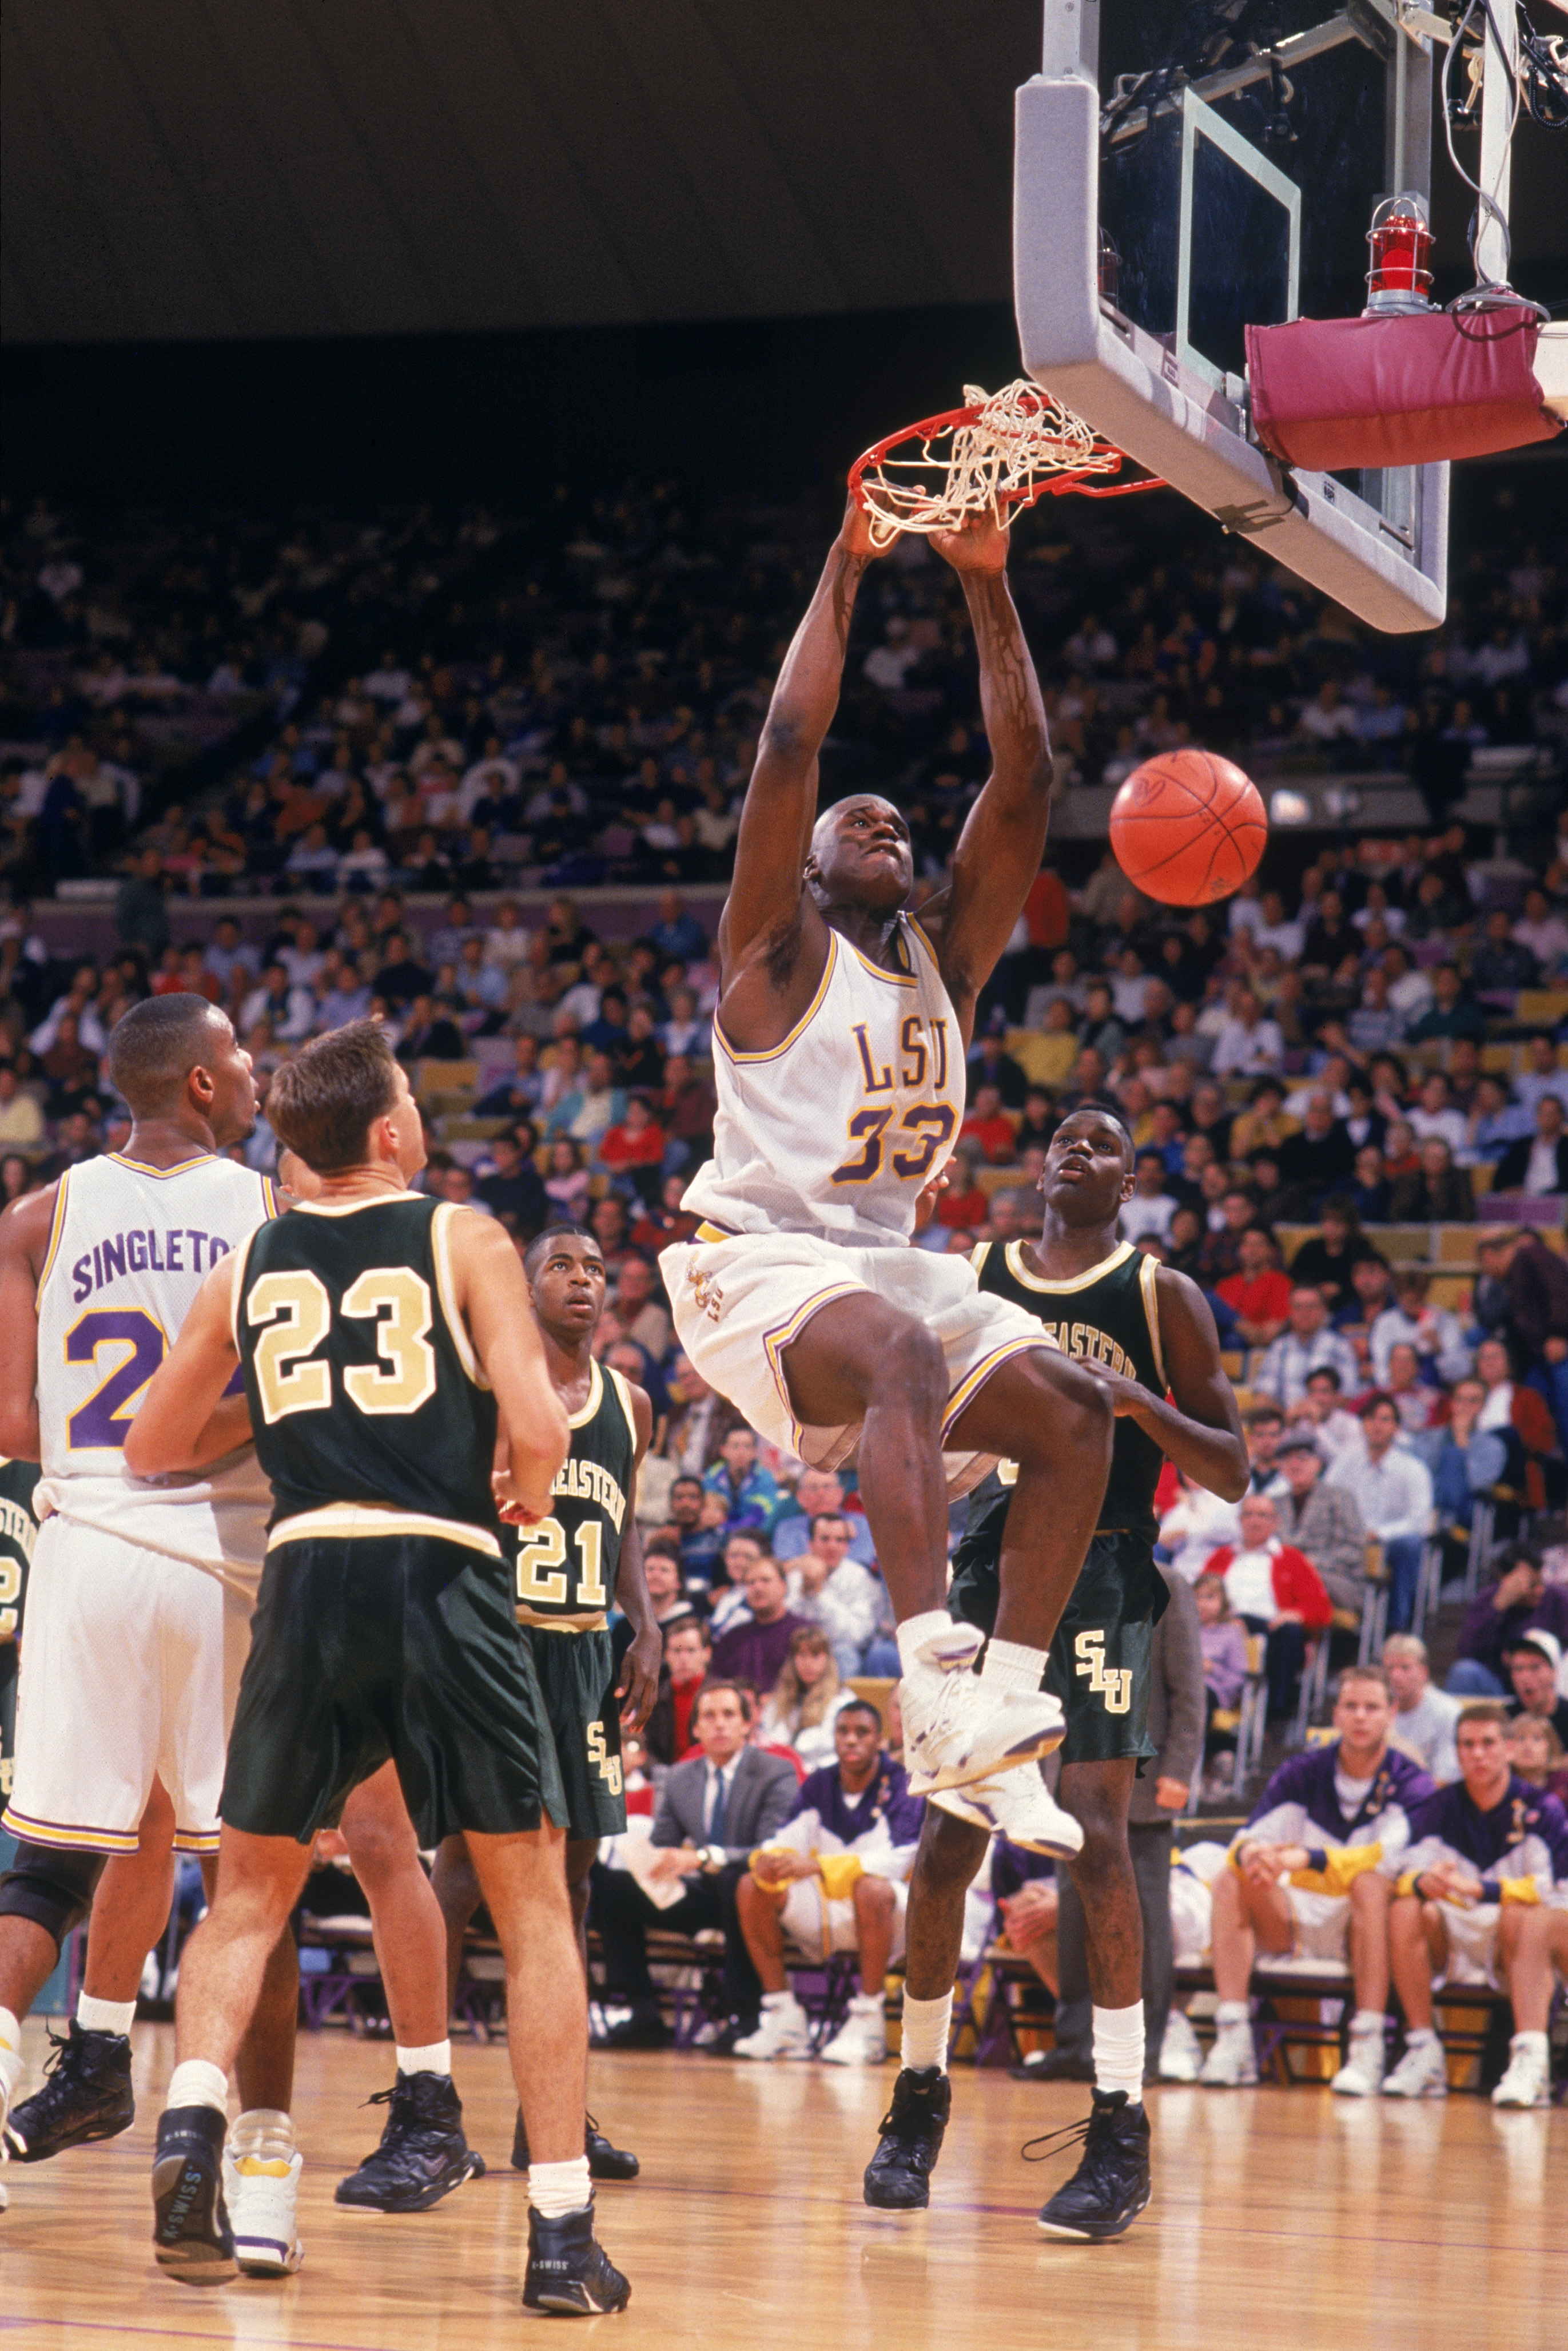 1991:  Shaquille O'Neal #33 of the Louisiana State University Tigers makes a slam dunk during an NCAA game against the Southeastern Louisiana University LIons in 1991.  (Phot by Brad Messina/Getty Images)